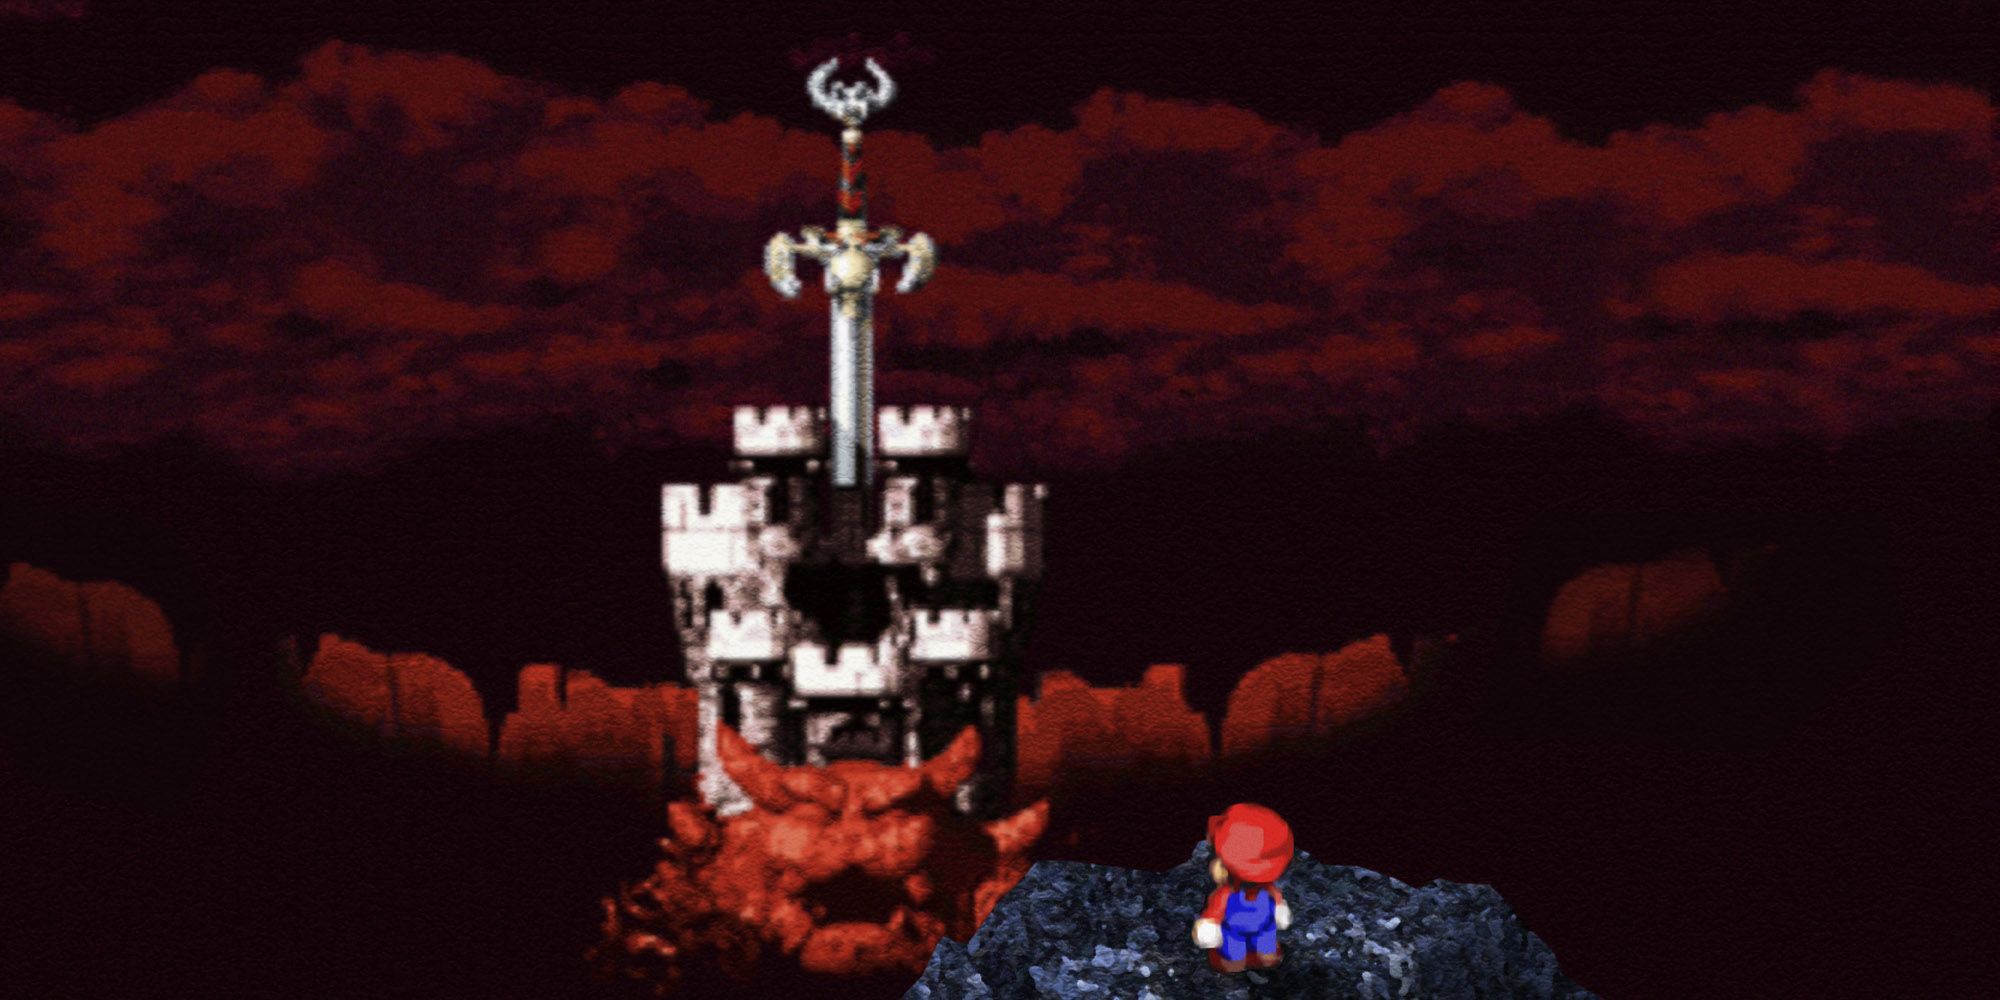 Mario overlooking Bowser's castle